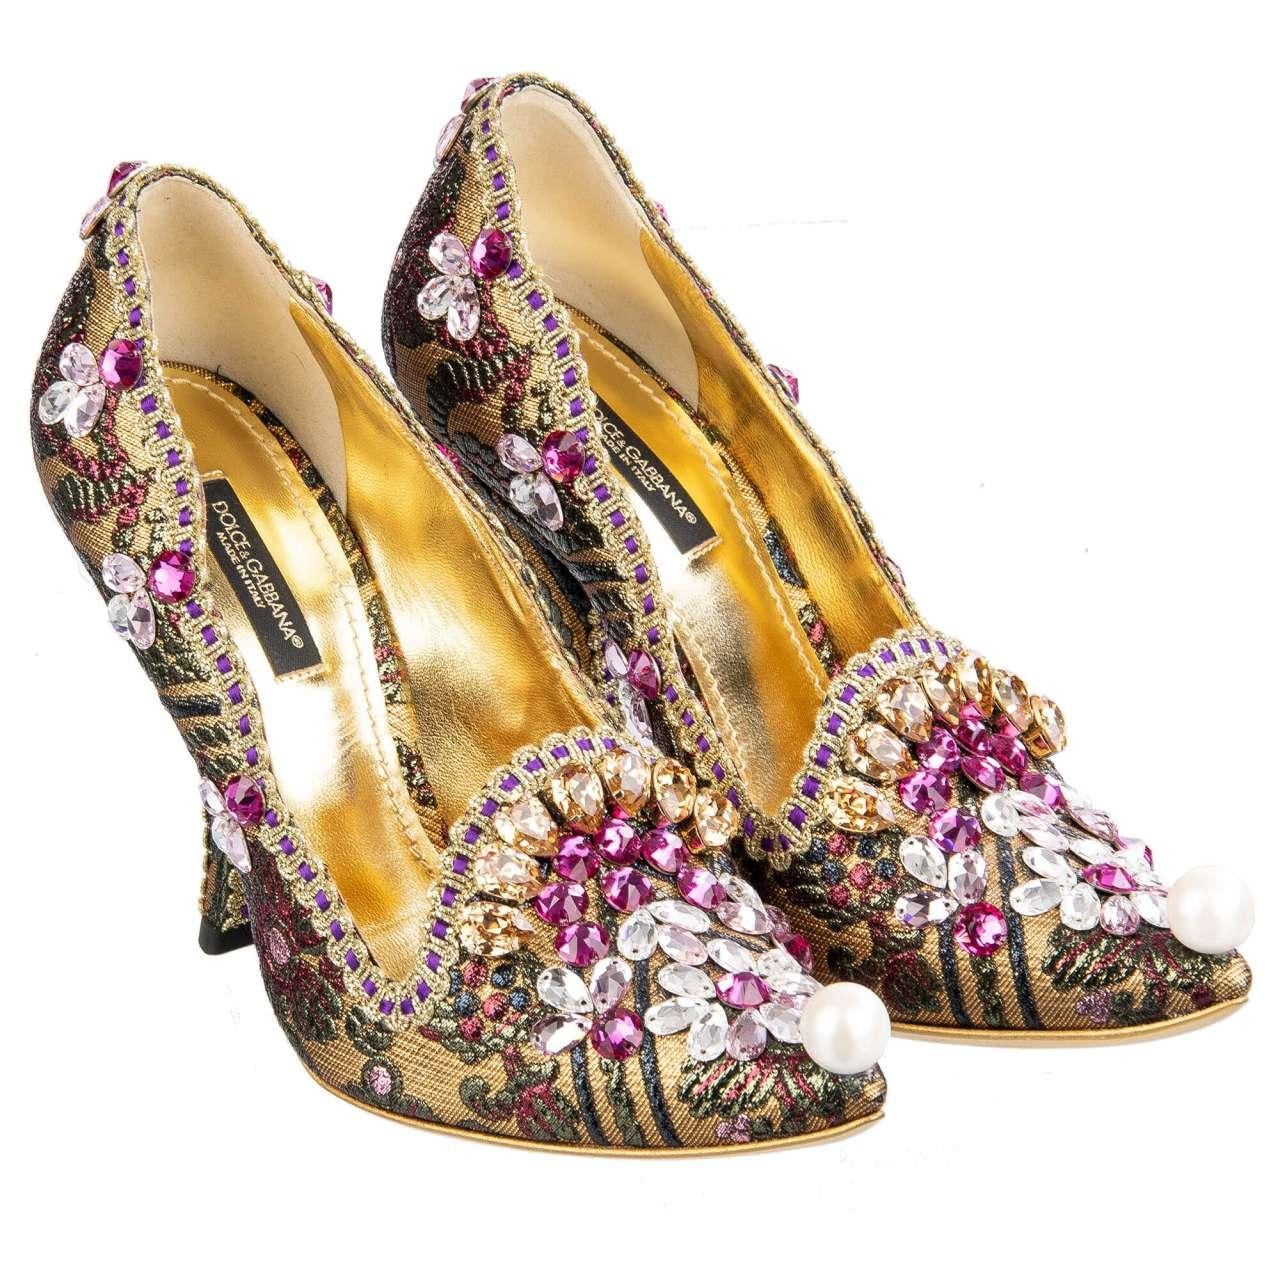 - Pointed Lurex Jacquard Pumps ALADINO in gold with crystals embroidery, floral patern and pearl at the toe by DOLCE & GABBANA - New with Box - MADE IN ITALY - Former RRP: EUR 1.250 - Crystals embroidery and large pearl - Model: CD0900-AM927-8B034 -